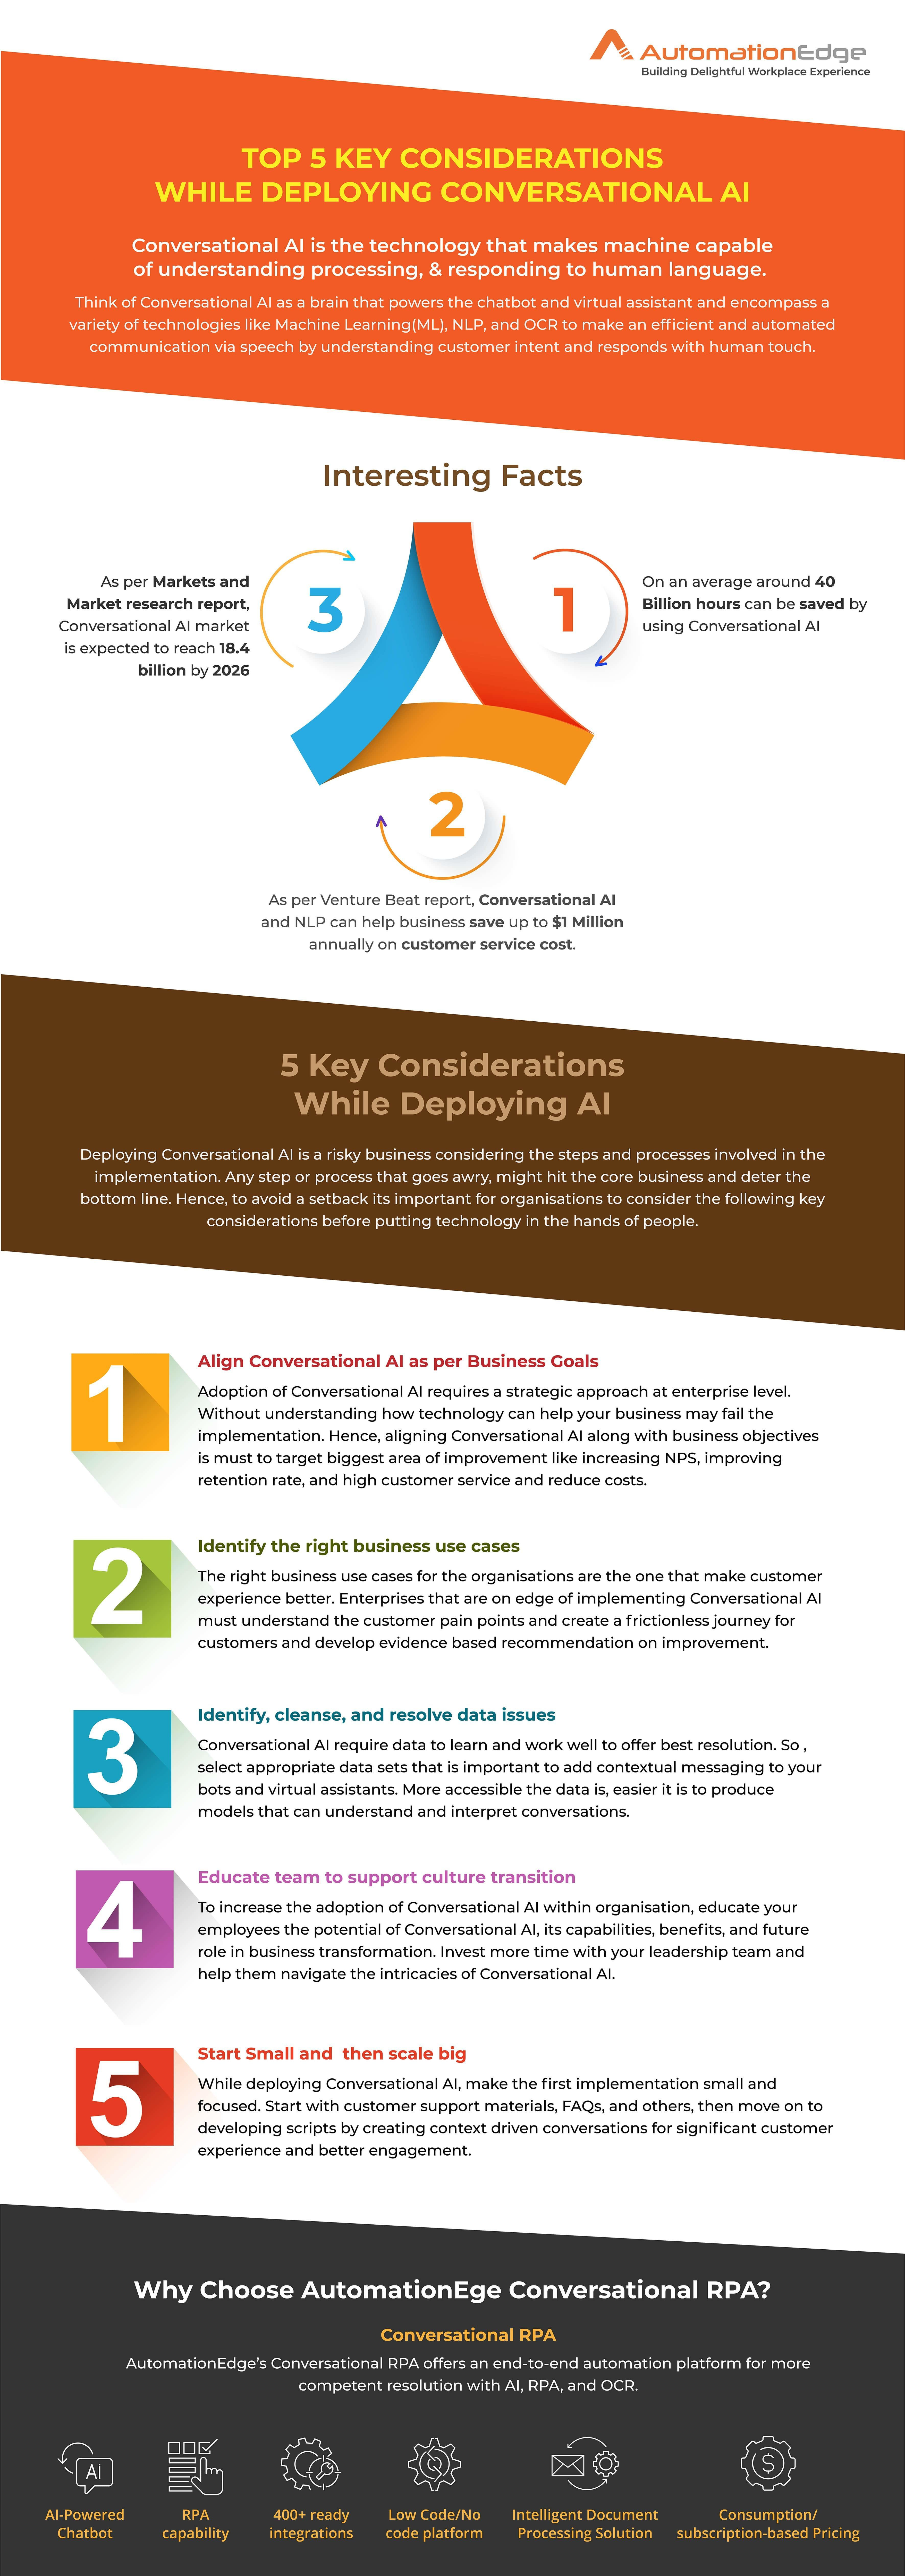 Top 5 Key Considerations While Deploying Conversational AI